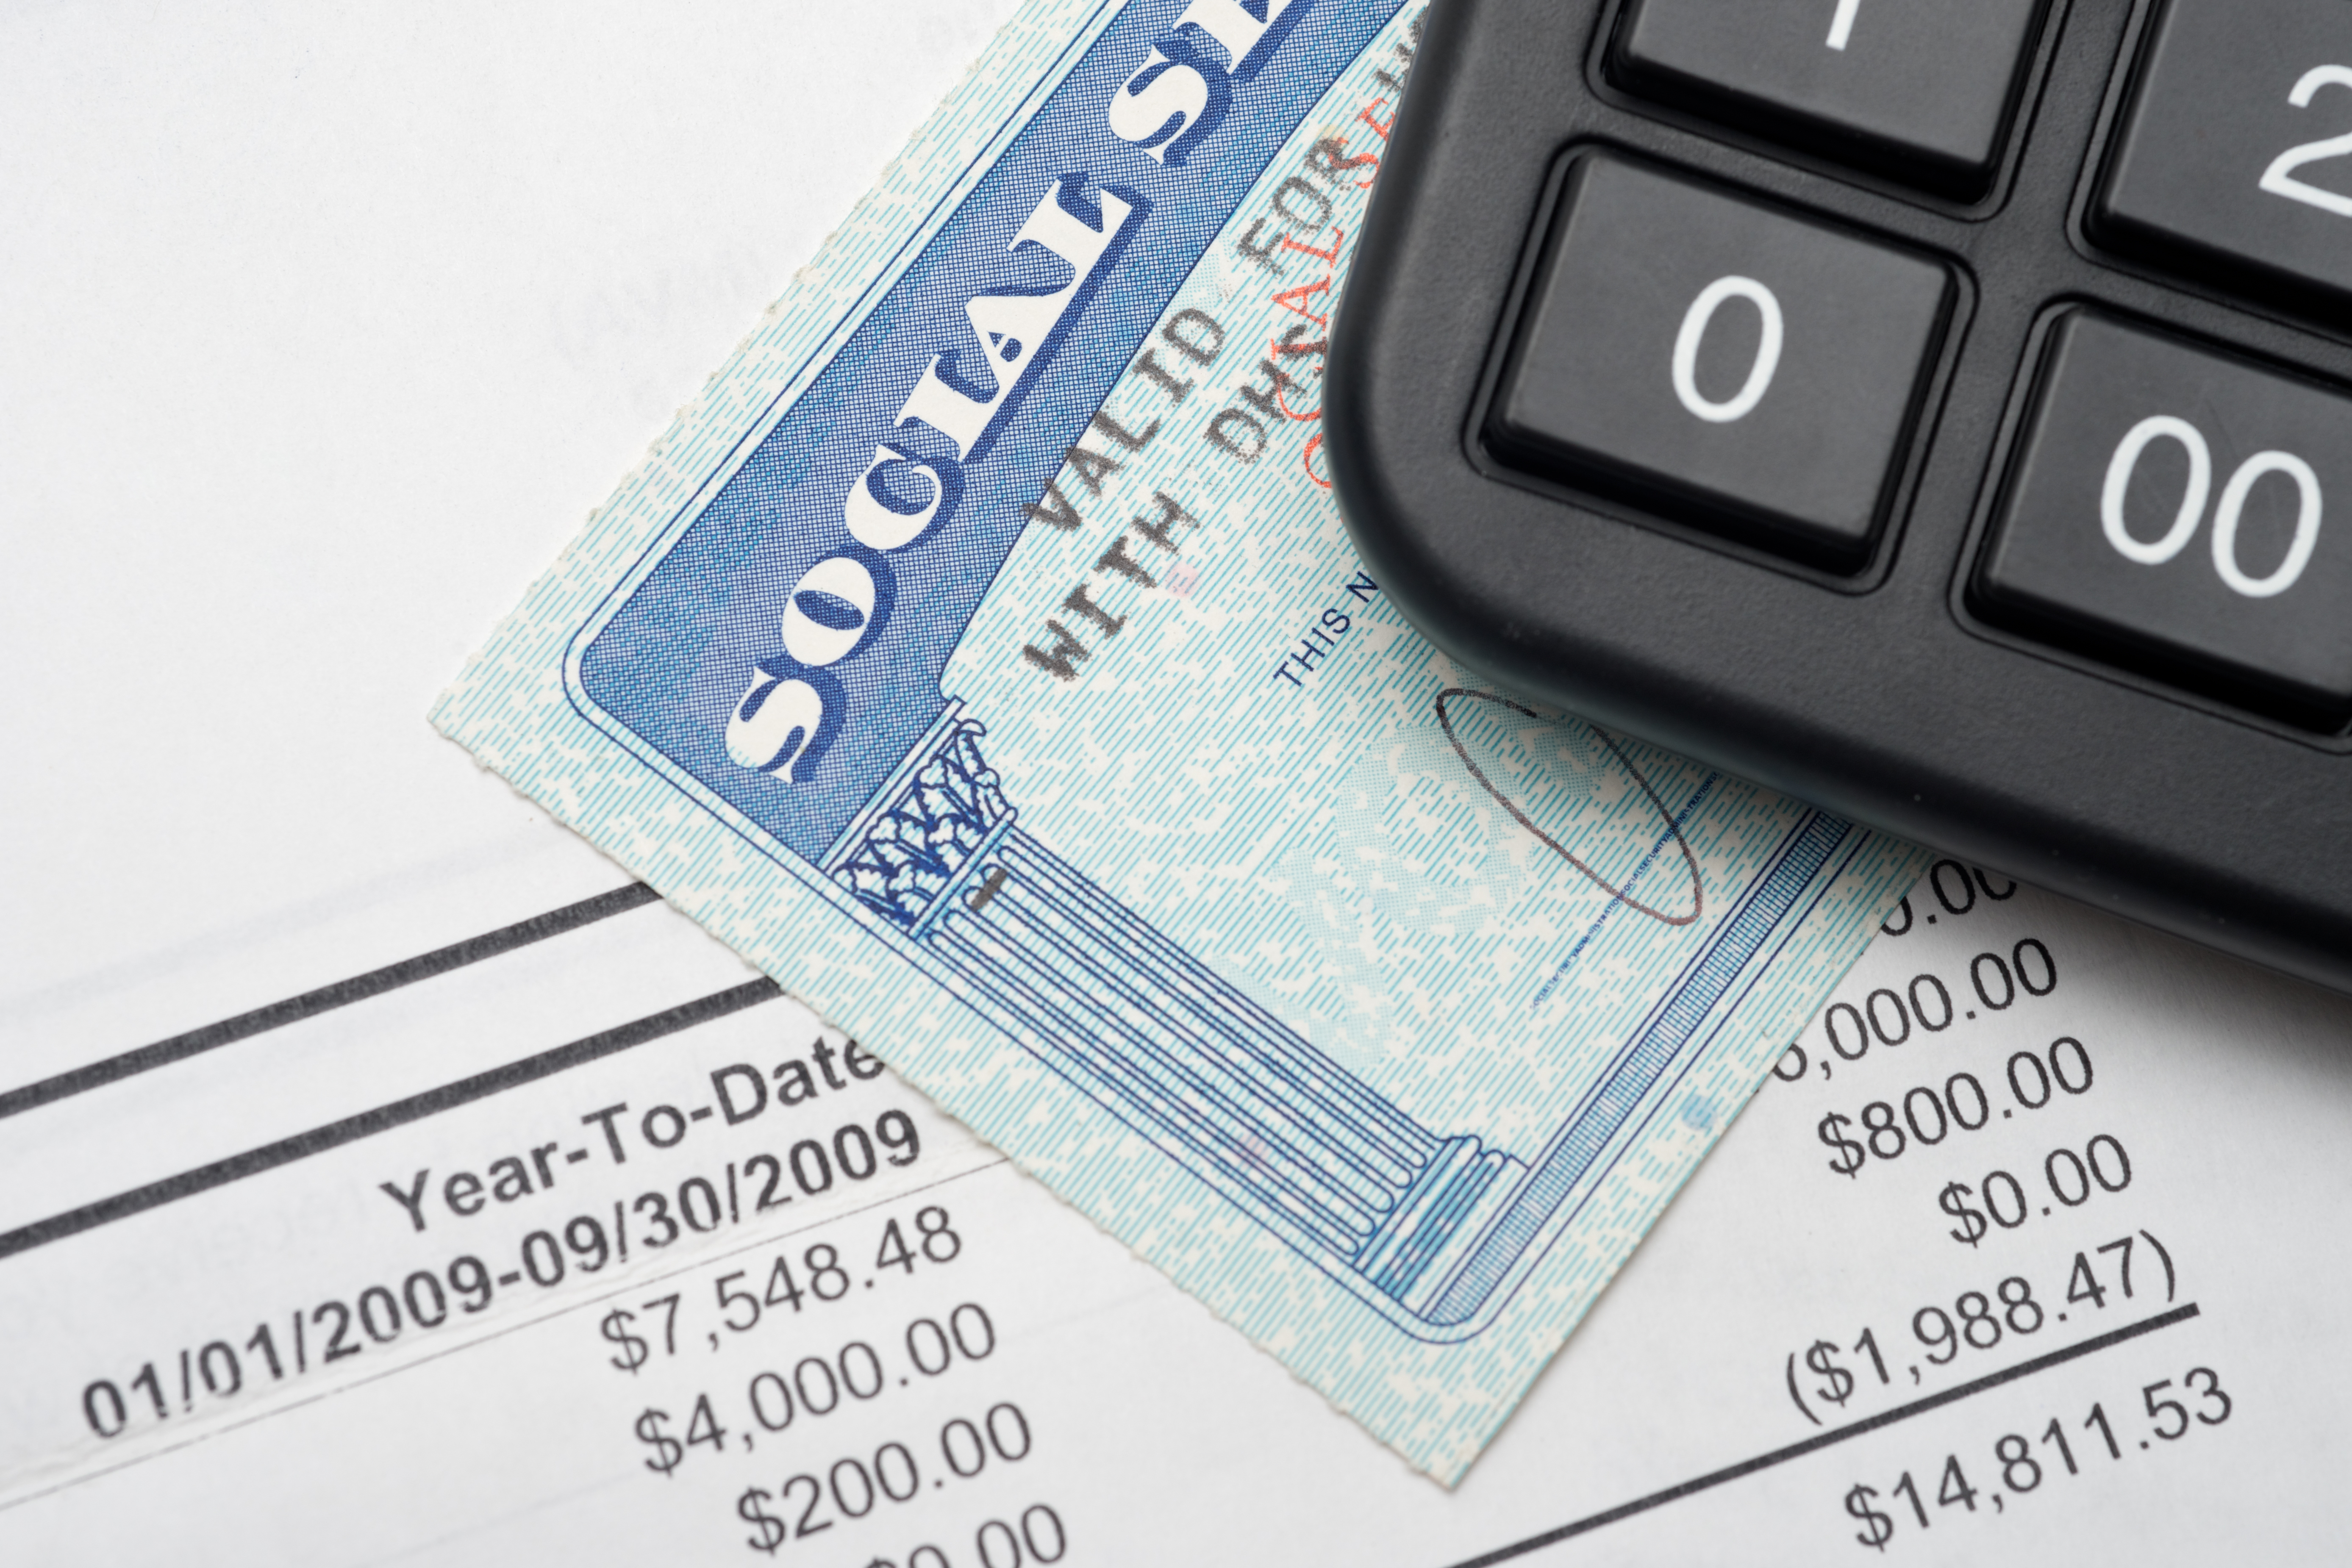 Social Security: how your benefit is adjusted annually based on your income